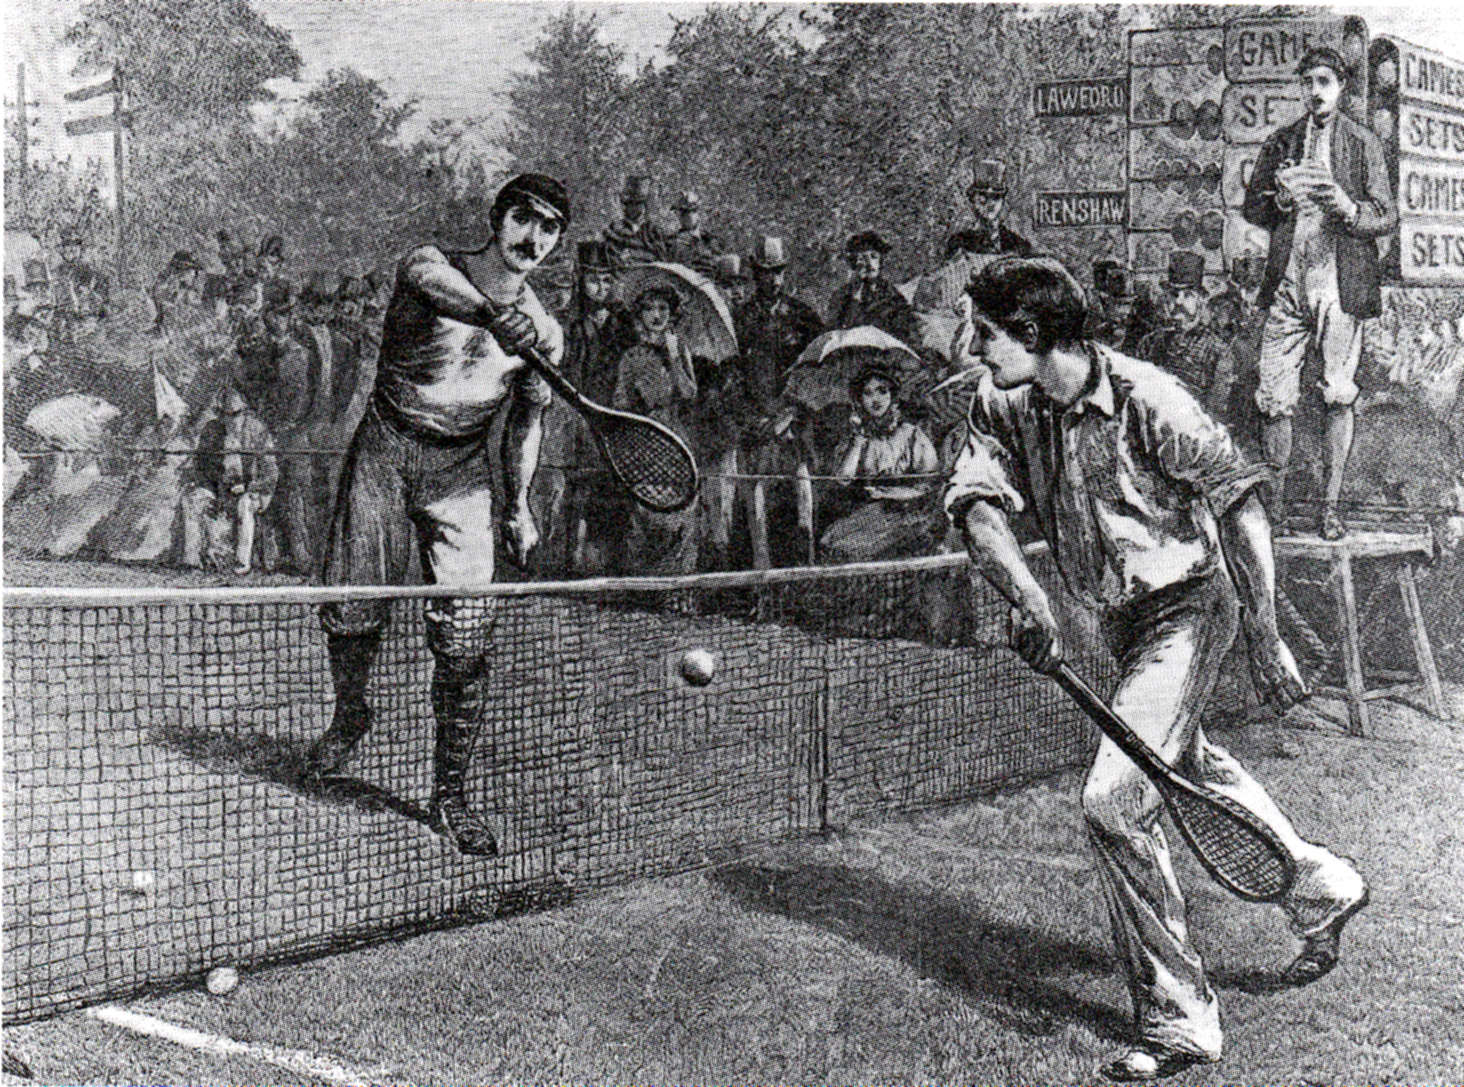 William Renshaw and Herbert Lawford, playing a match at the Wimbledon Championships in the 1880s